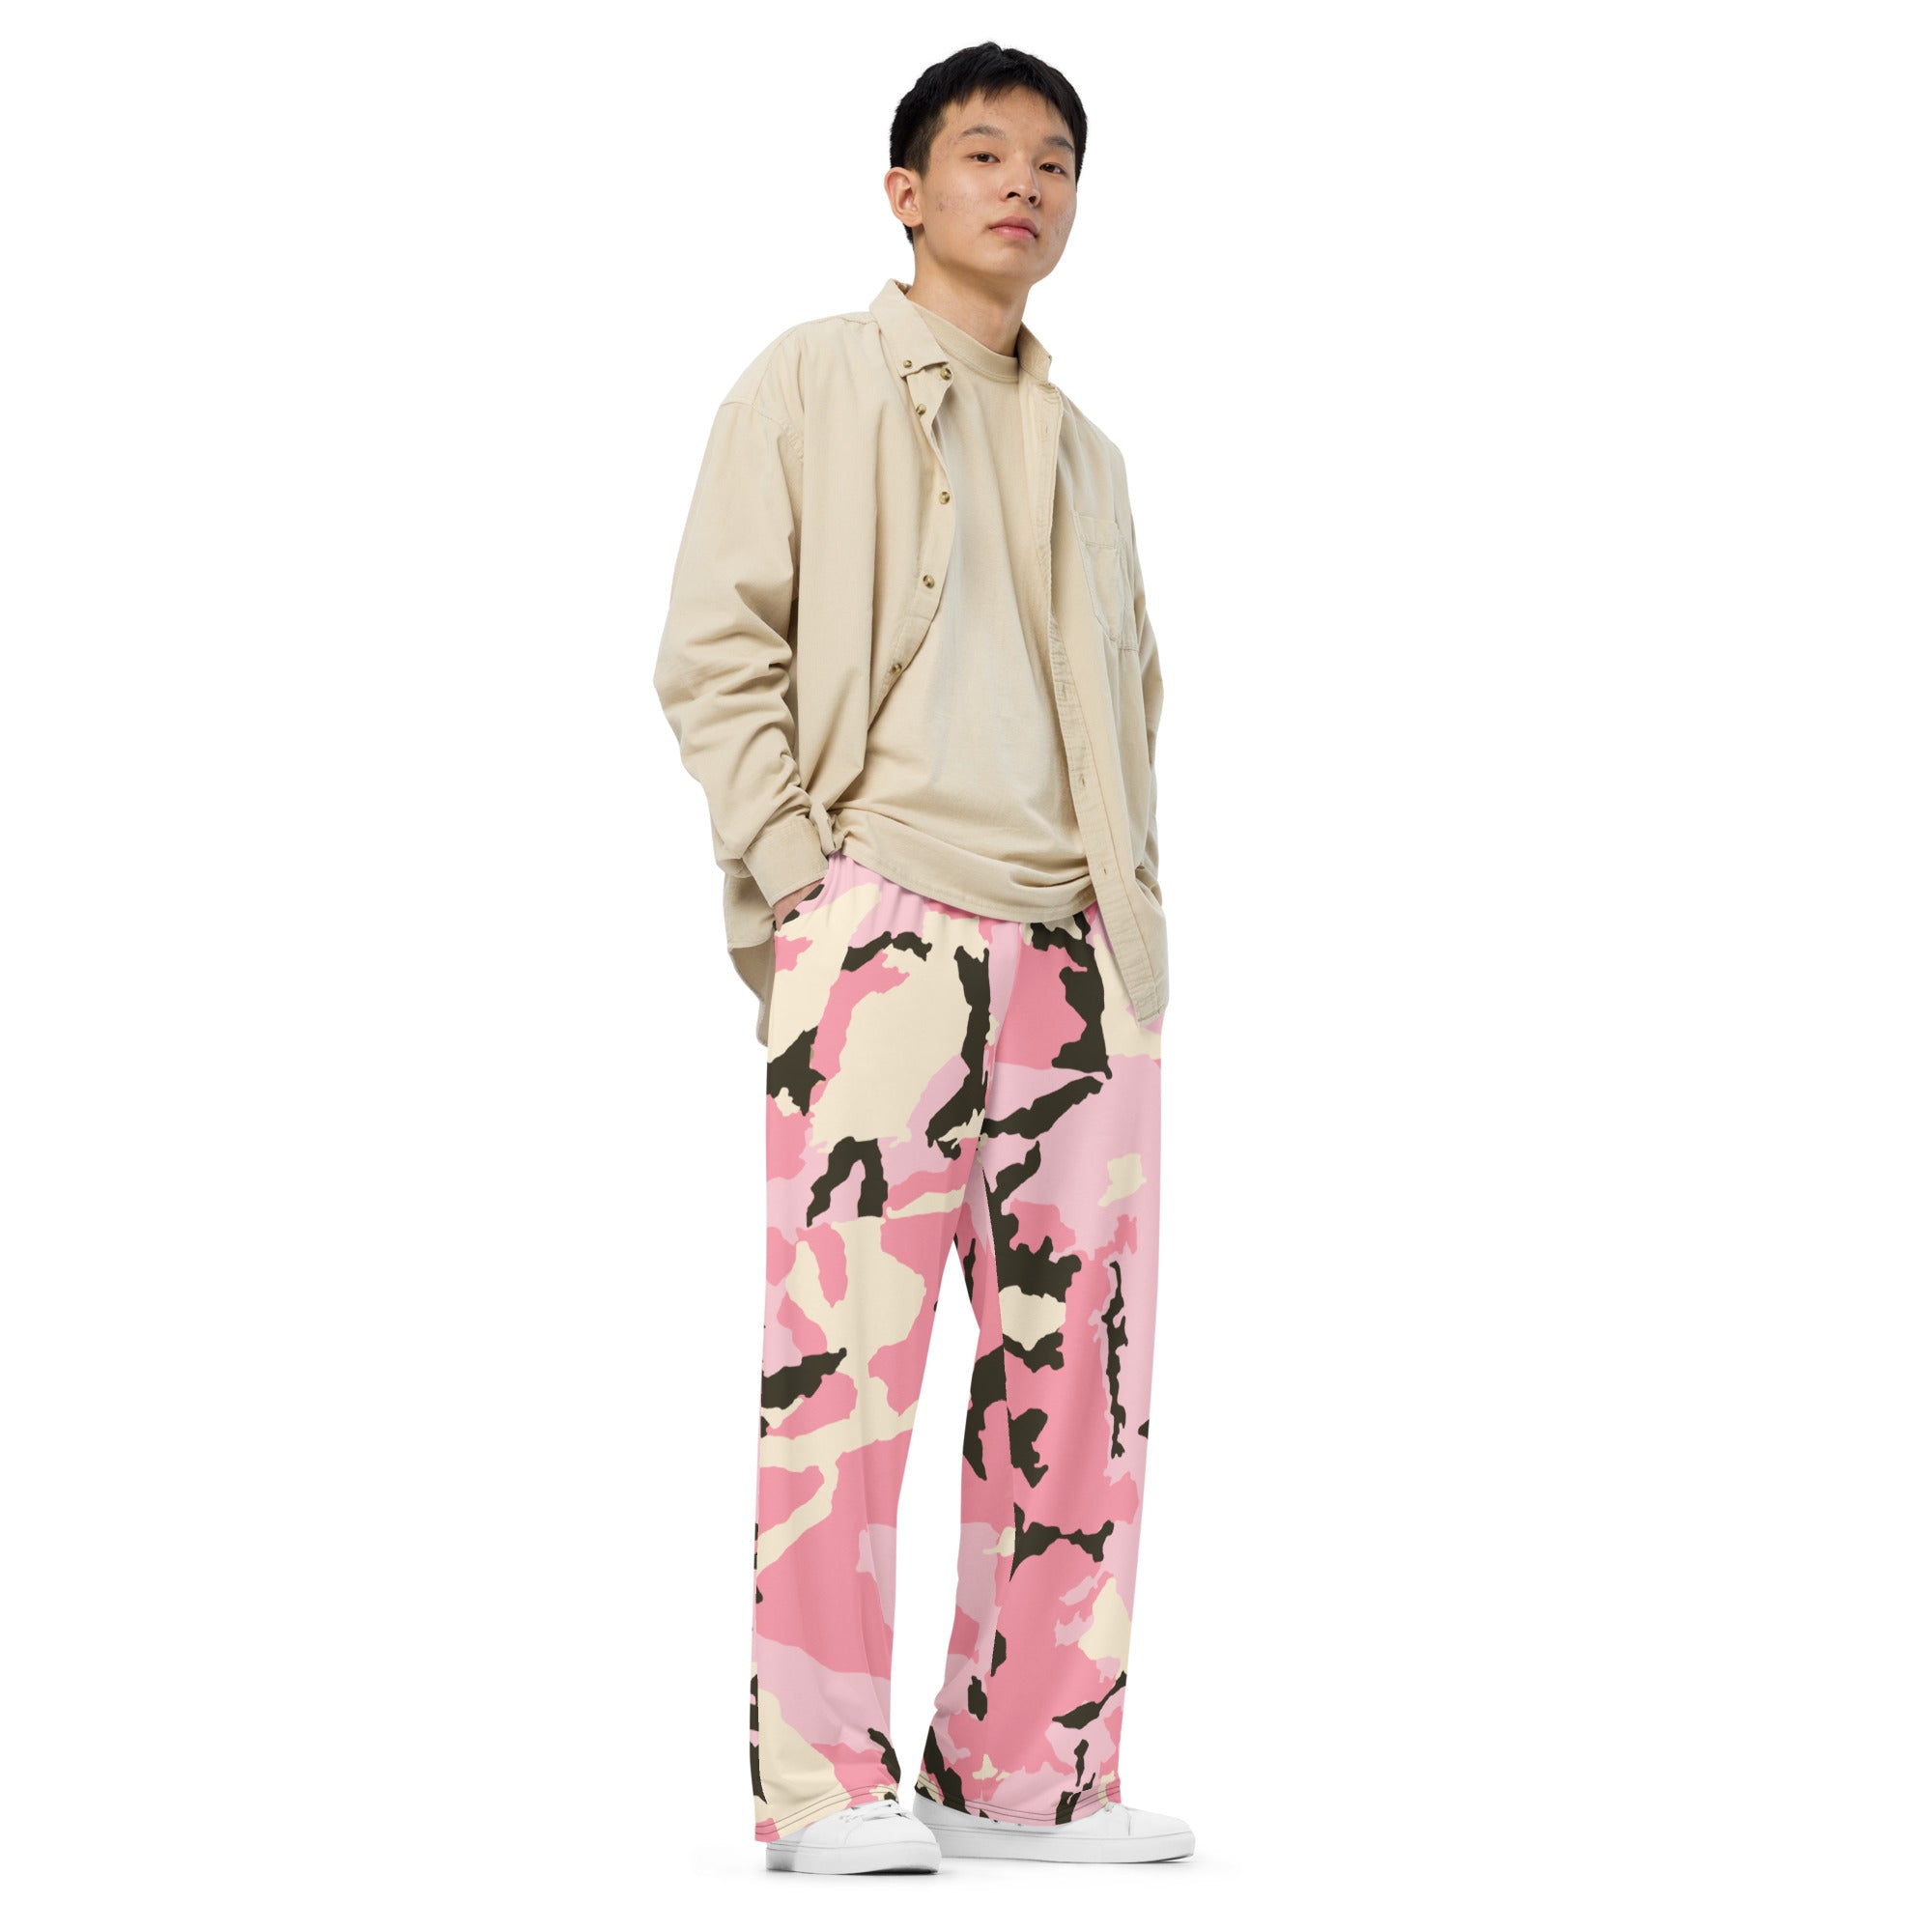 All-over print unisex wide-leg pants, Pink Military Pants, Fun, Relaxing, Gym